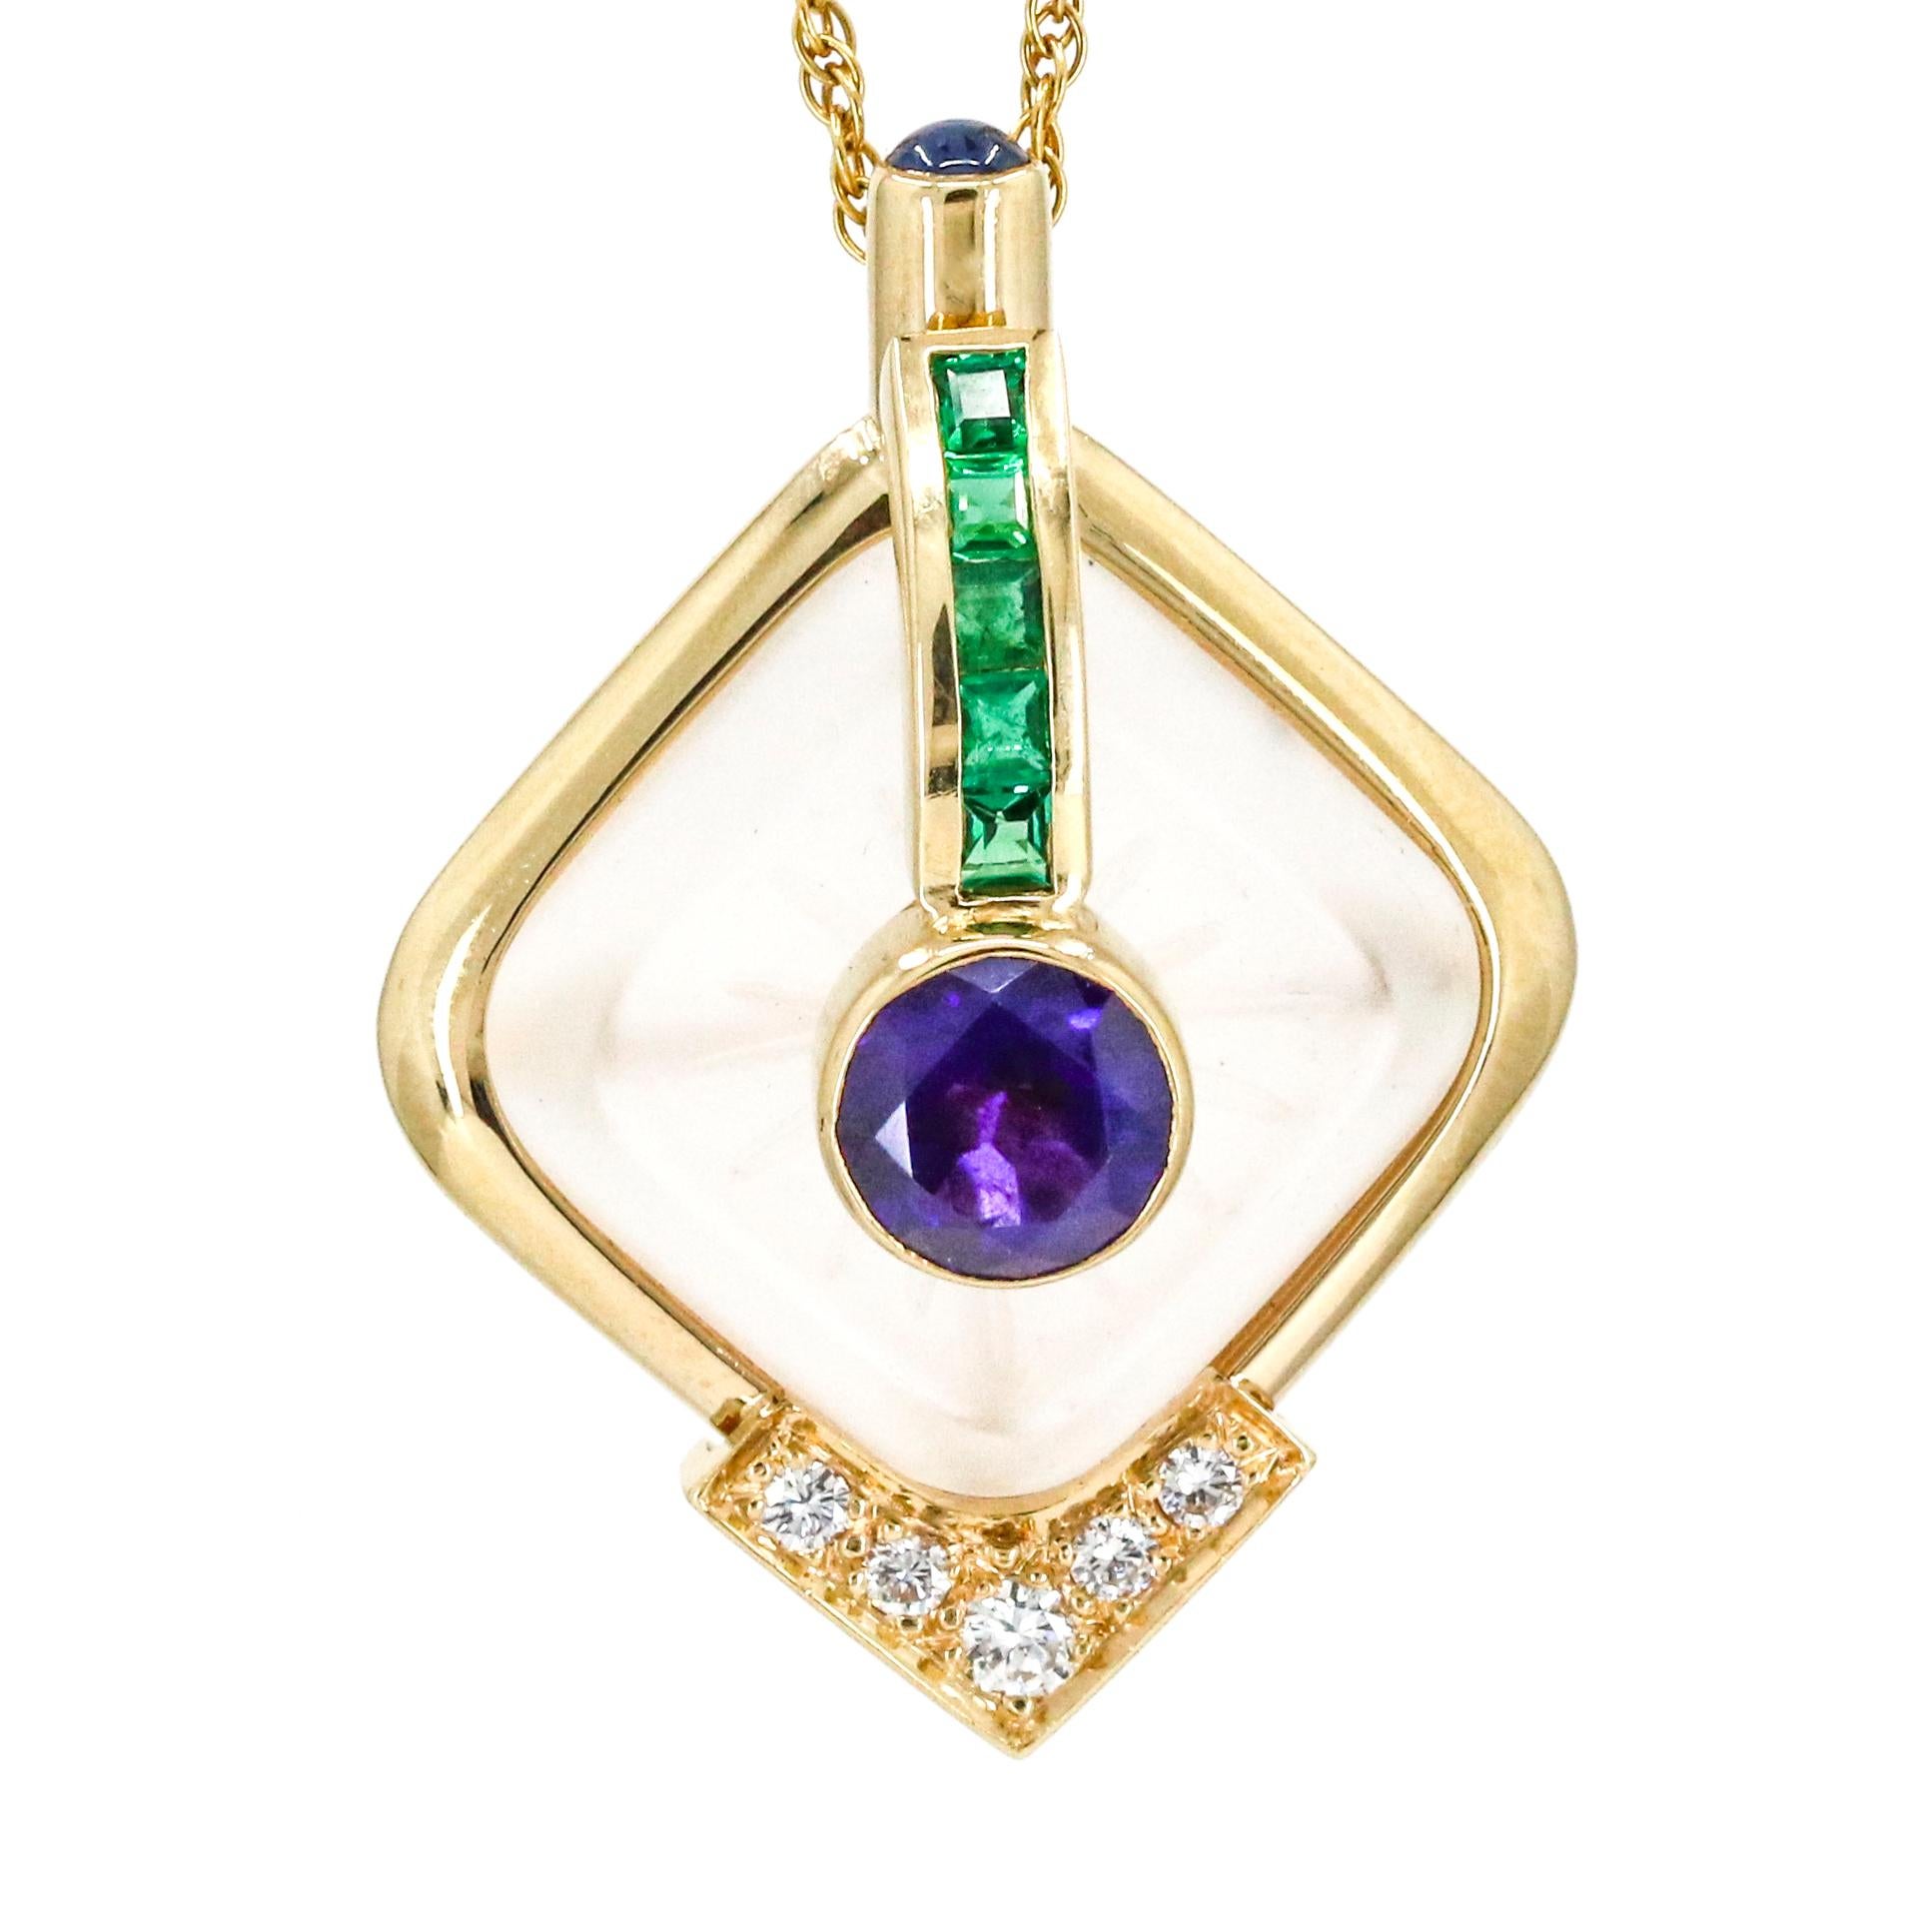 Quartz, diamond, amethyst, and emerald pendant necklace in 14-karat yellow gold. The pendant has a bezel set round-cut amethyst at the center of a carved white quartz. The quartz is bezel set in a polished gold setting with 5 prong set round